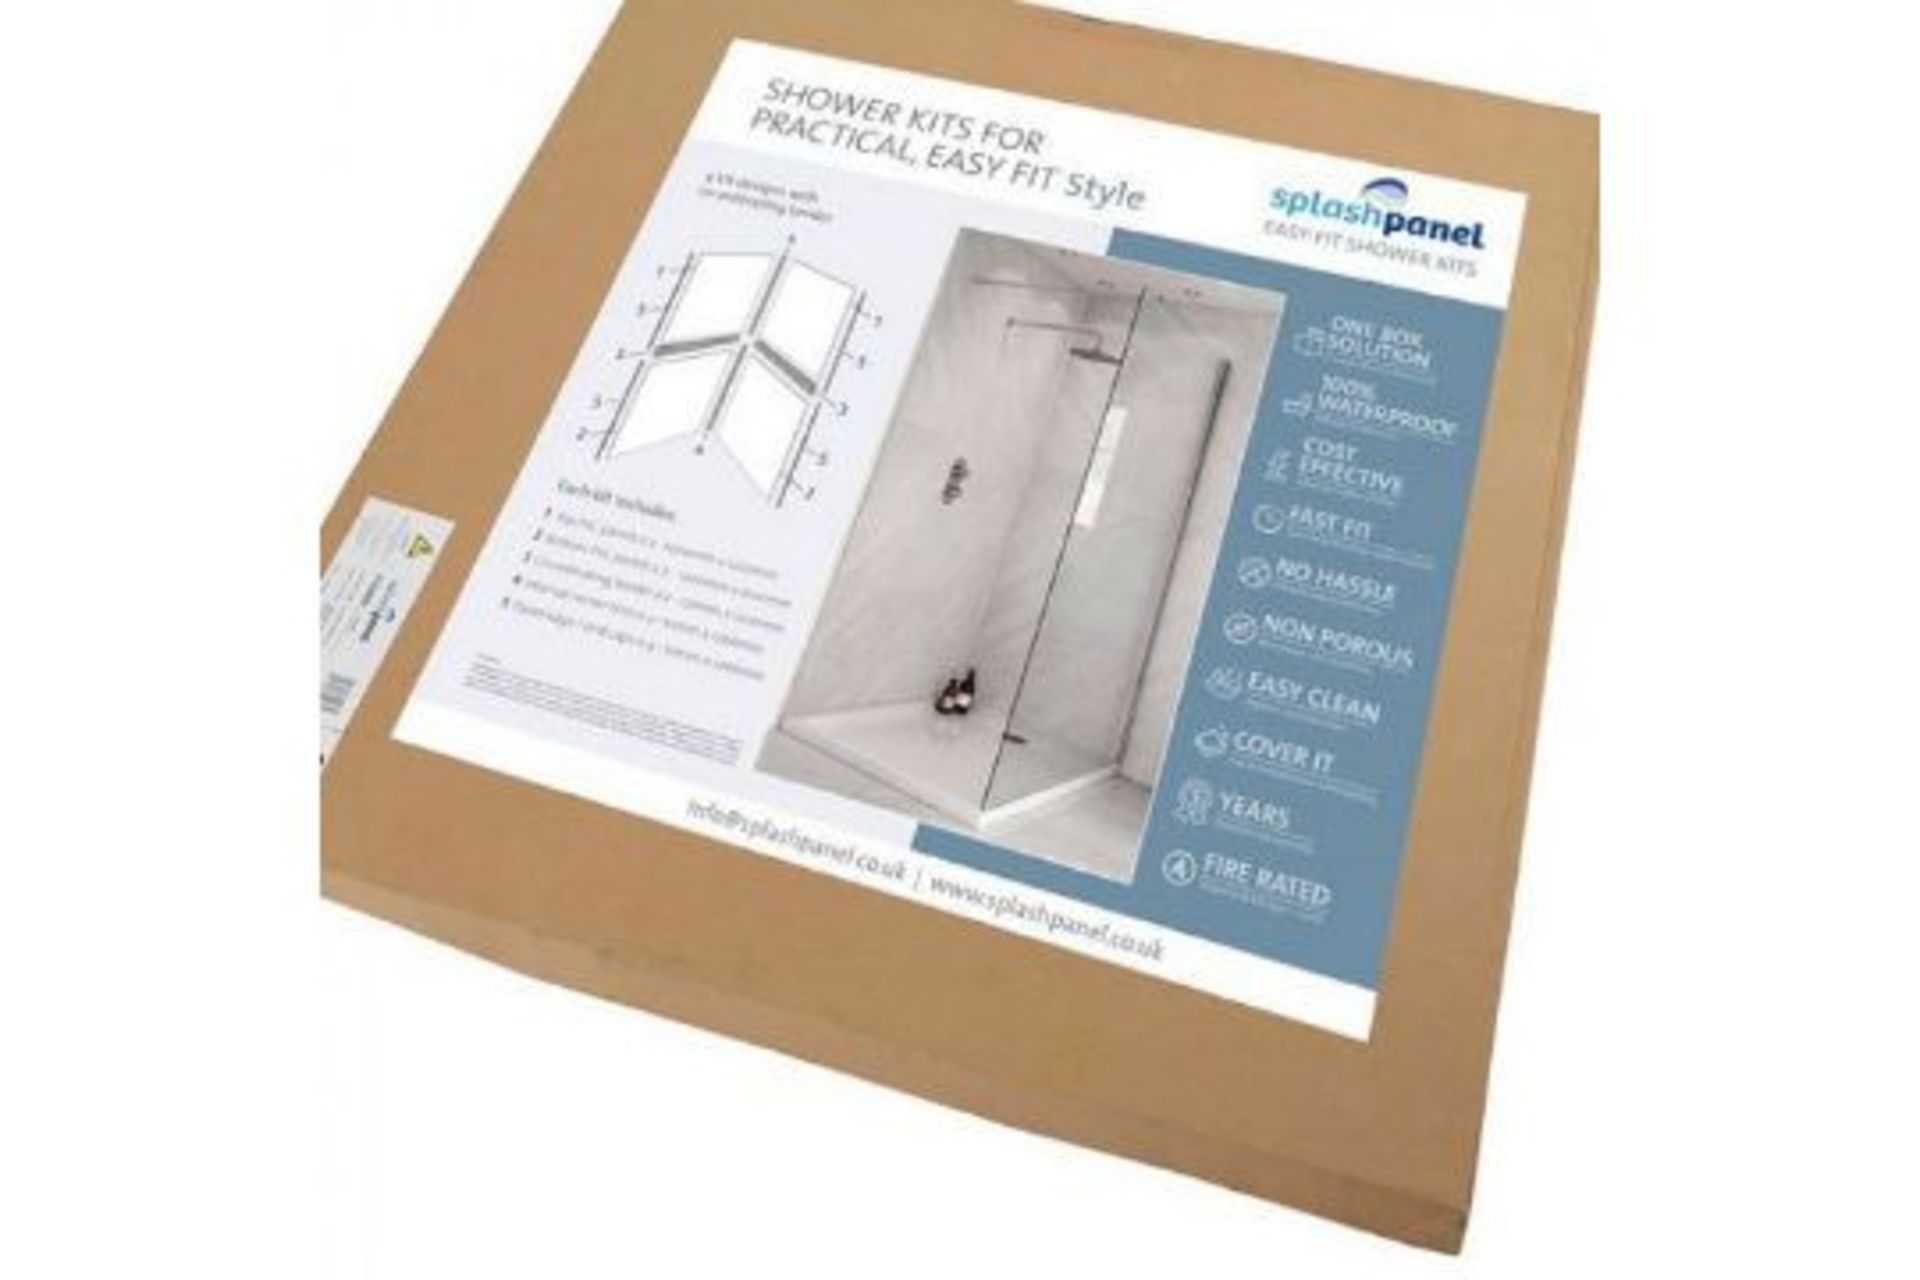 Pallet of 12x Sand stone Matt Splash Panel Shower kits, all brand new, RRP £175, please see pictures